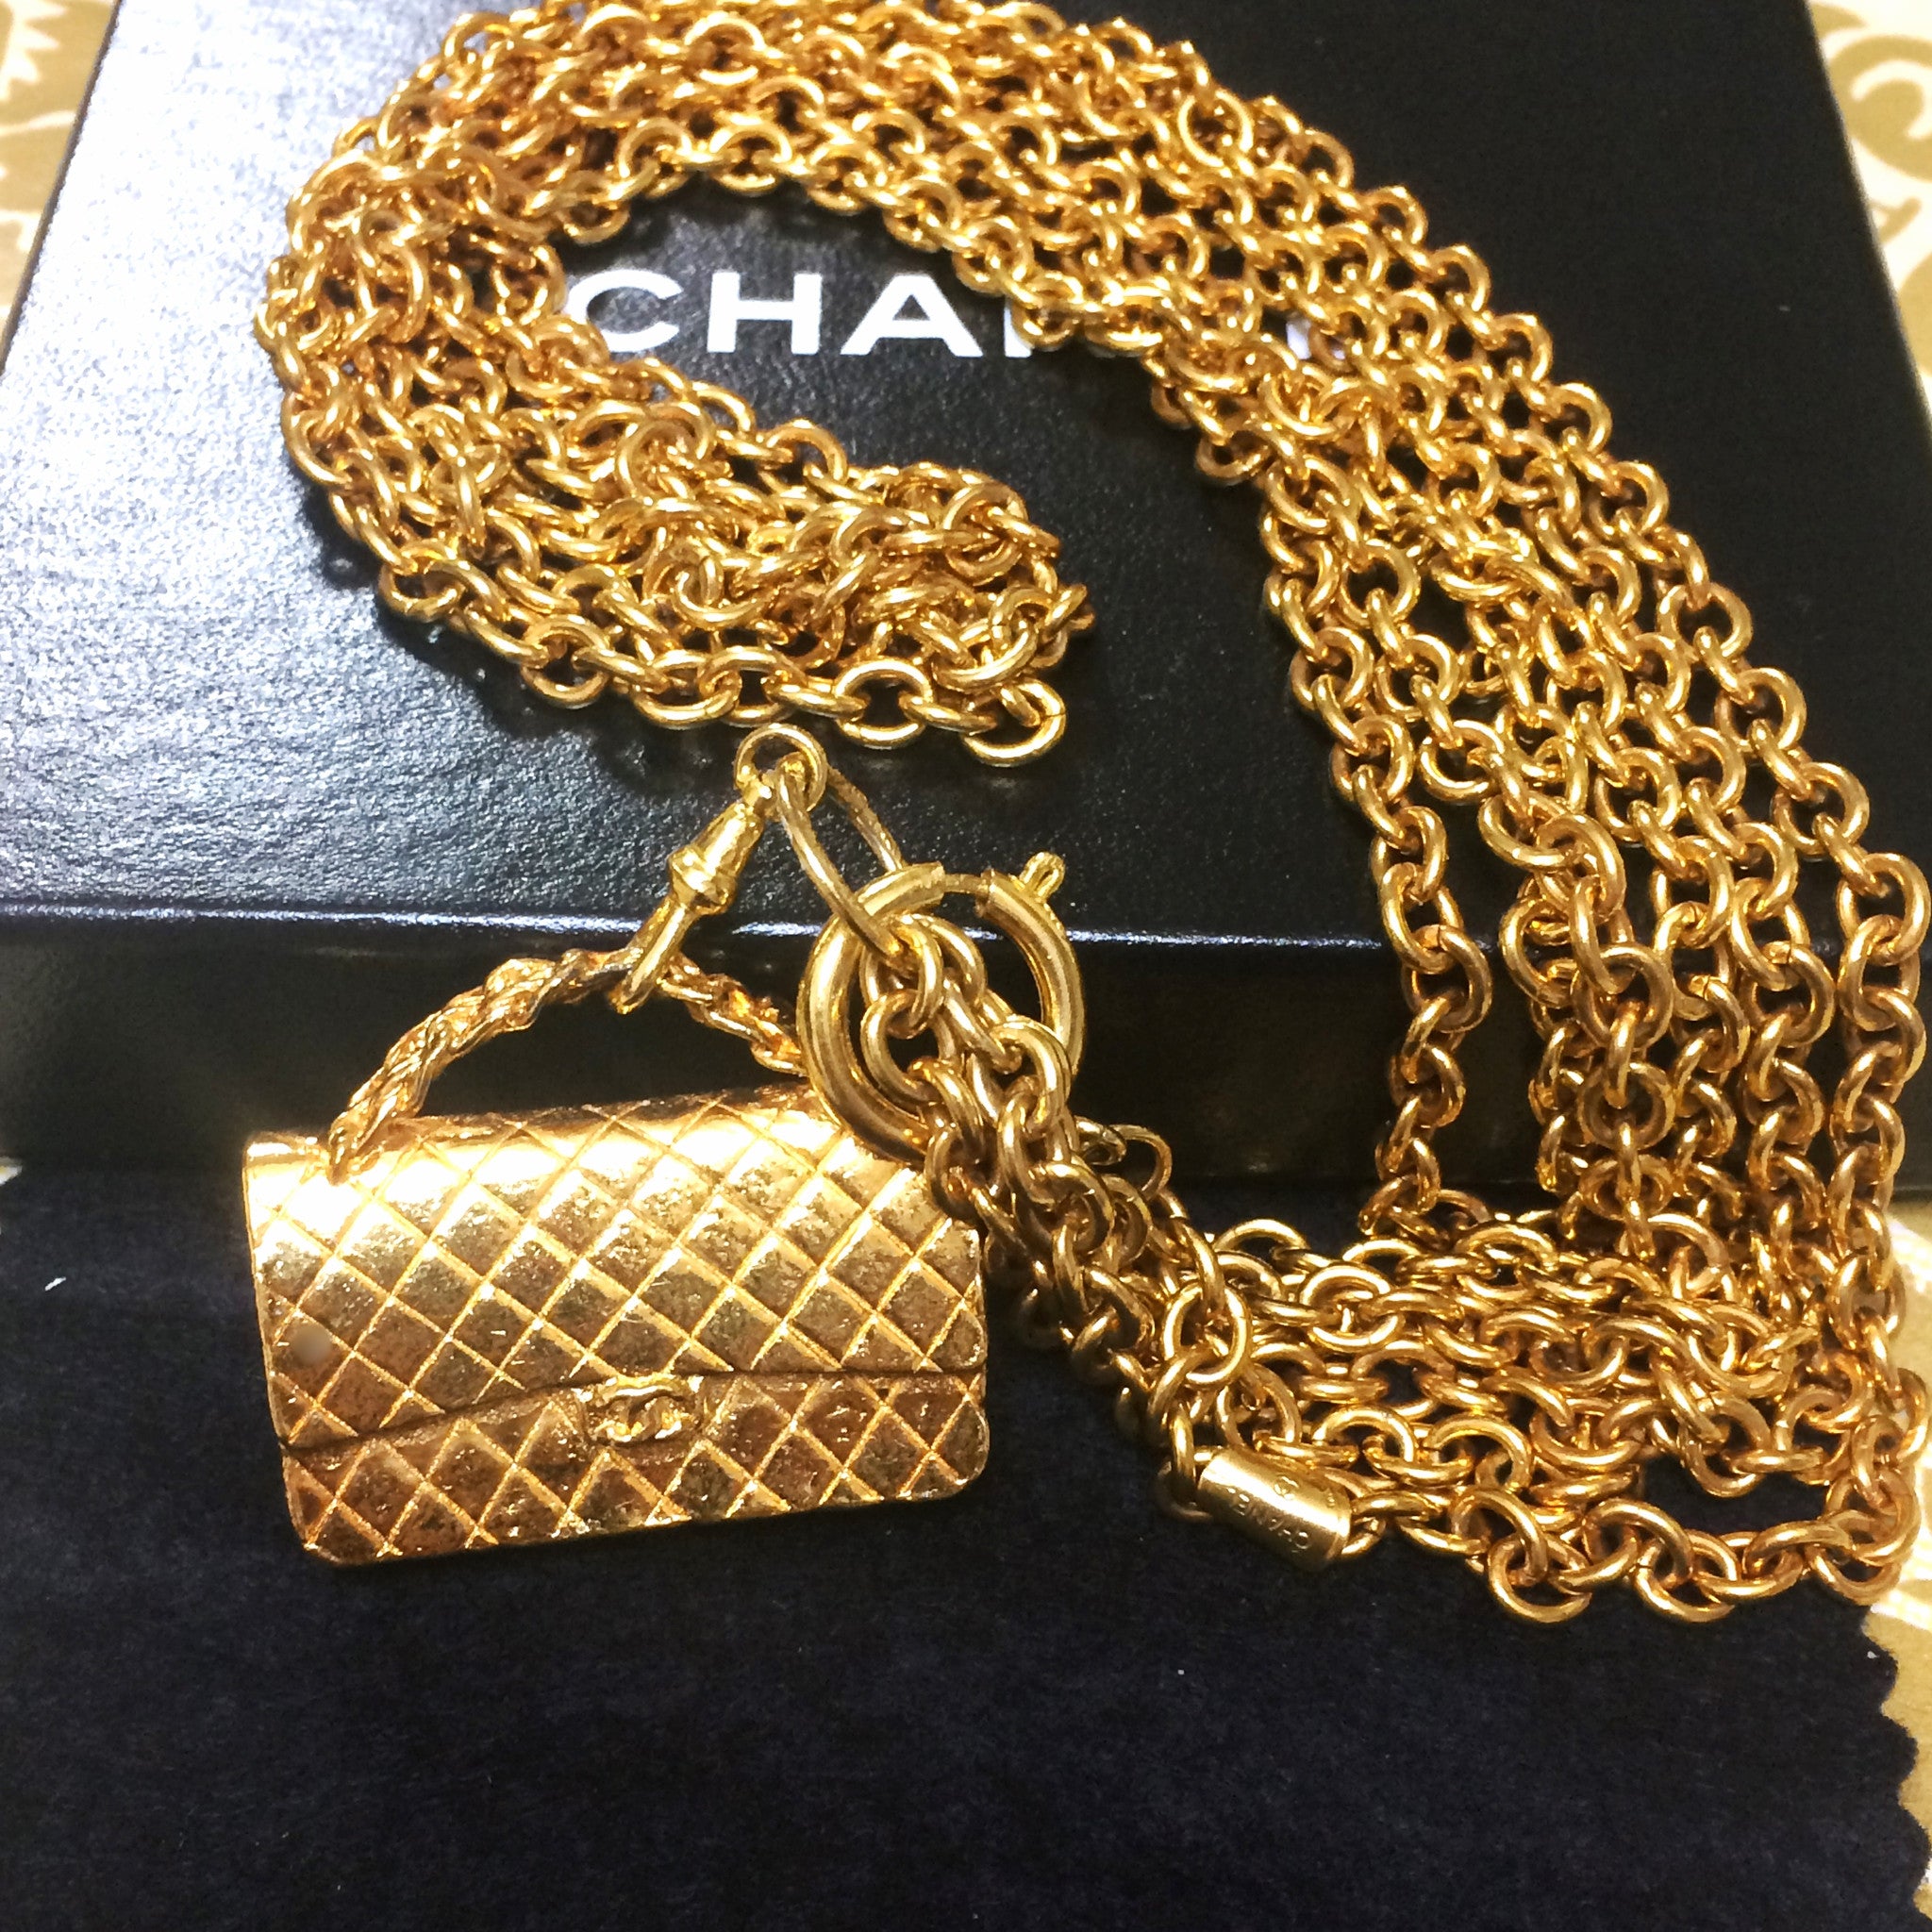 Vintage CHANEL golden double chain necklace with classic 2.55 bag char –  eNdApPi ***where you can find your favorite designer  vintages..authentic, affordable, and lovable.